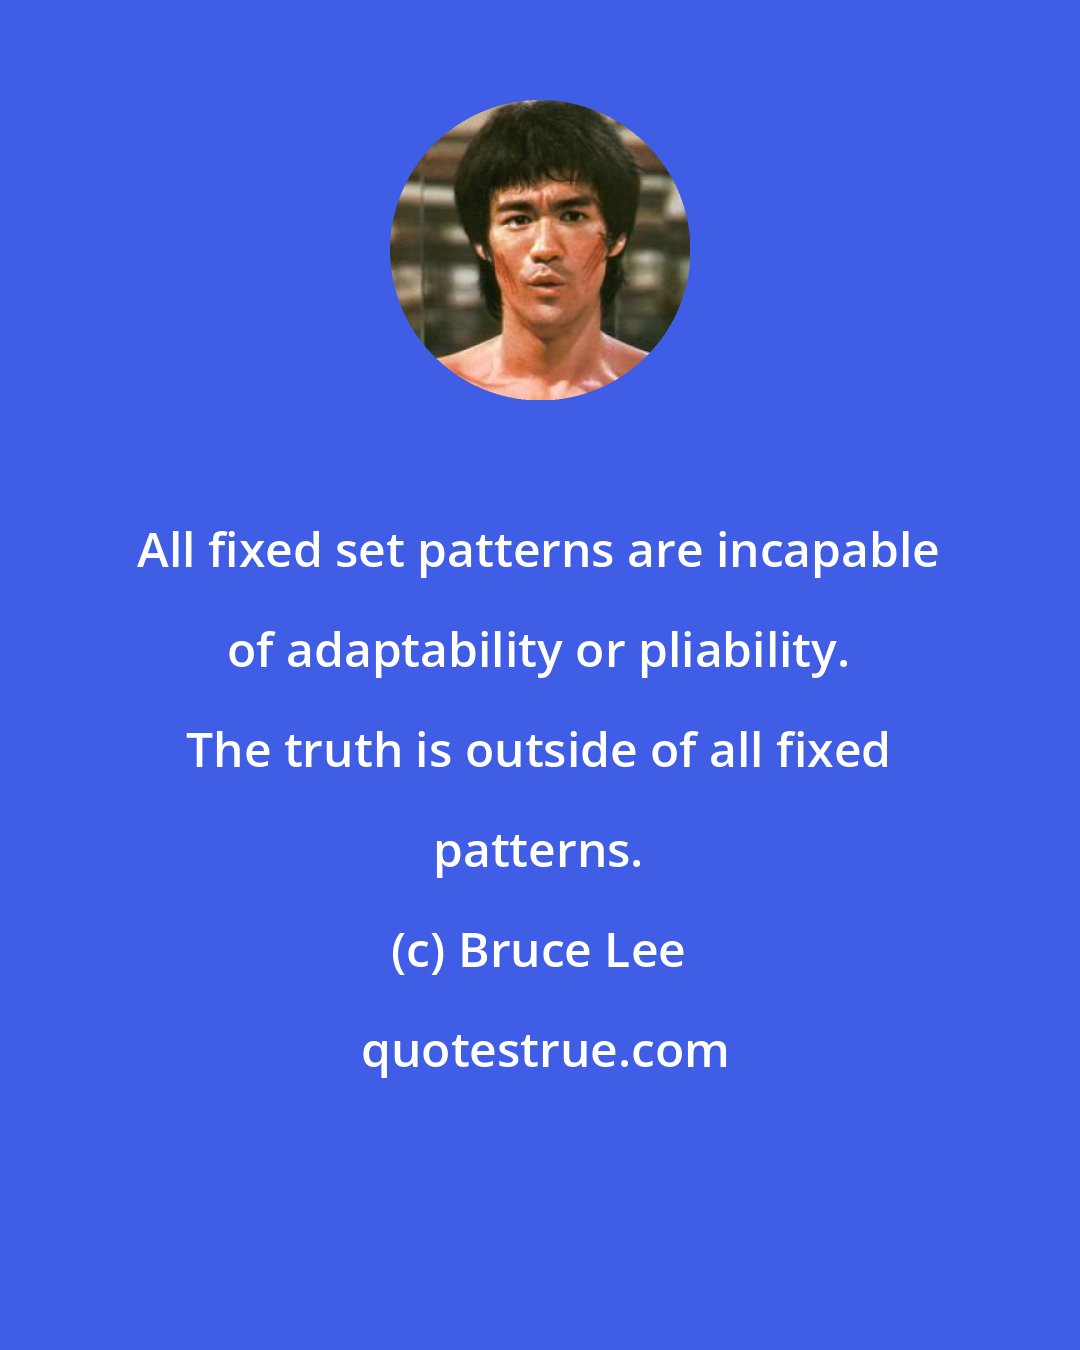 Bruce Lee: All fixed set patterns are incapable of adaptability or pliability. The truth is outside of all fixed patterns.